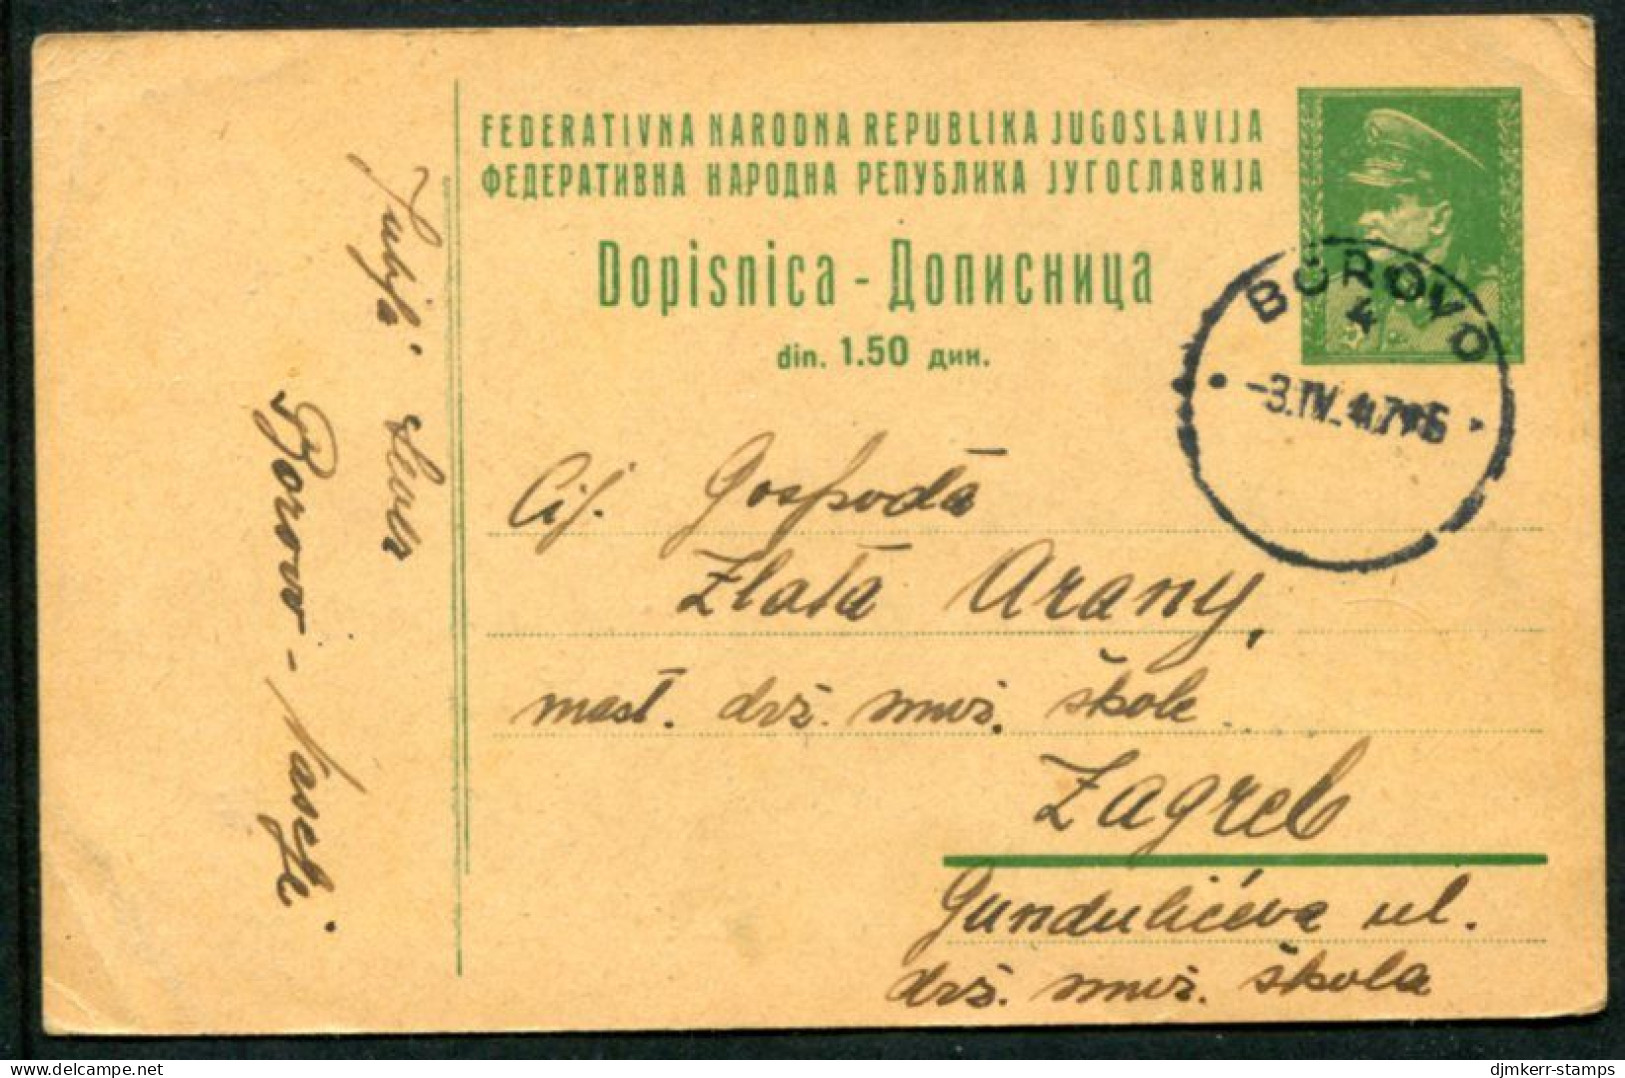 YUGOSLAVIA 1946 Tito 1.50 D.postal Stationery Card  With Text In Croatian/Serbian, Used.  Michel P108 - Postal Stationery